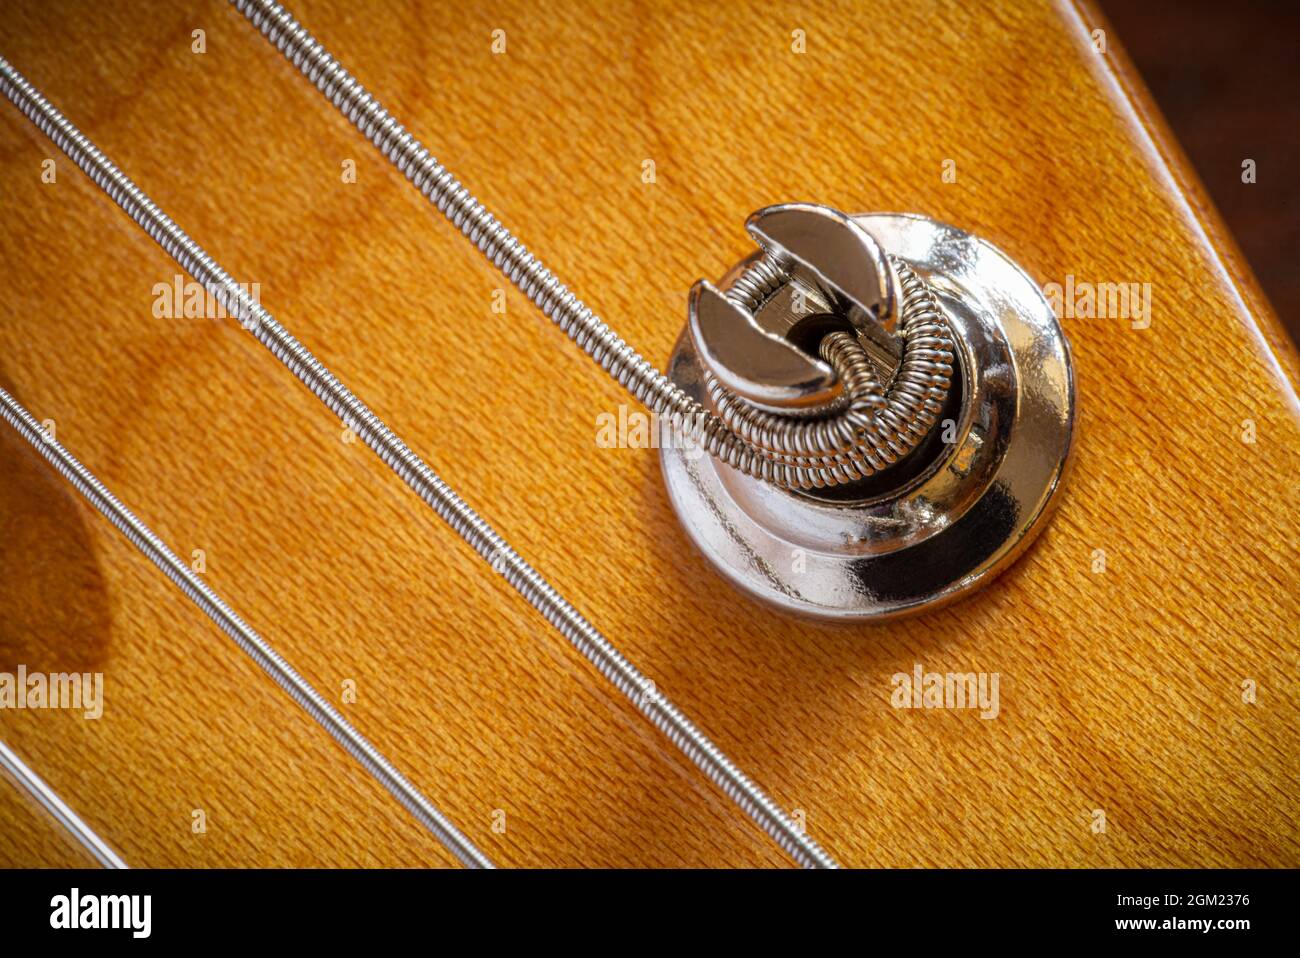 Detail of strings and a tuning keys, of an electric guitar Stock Photo